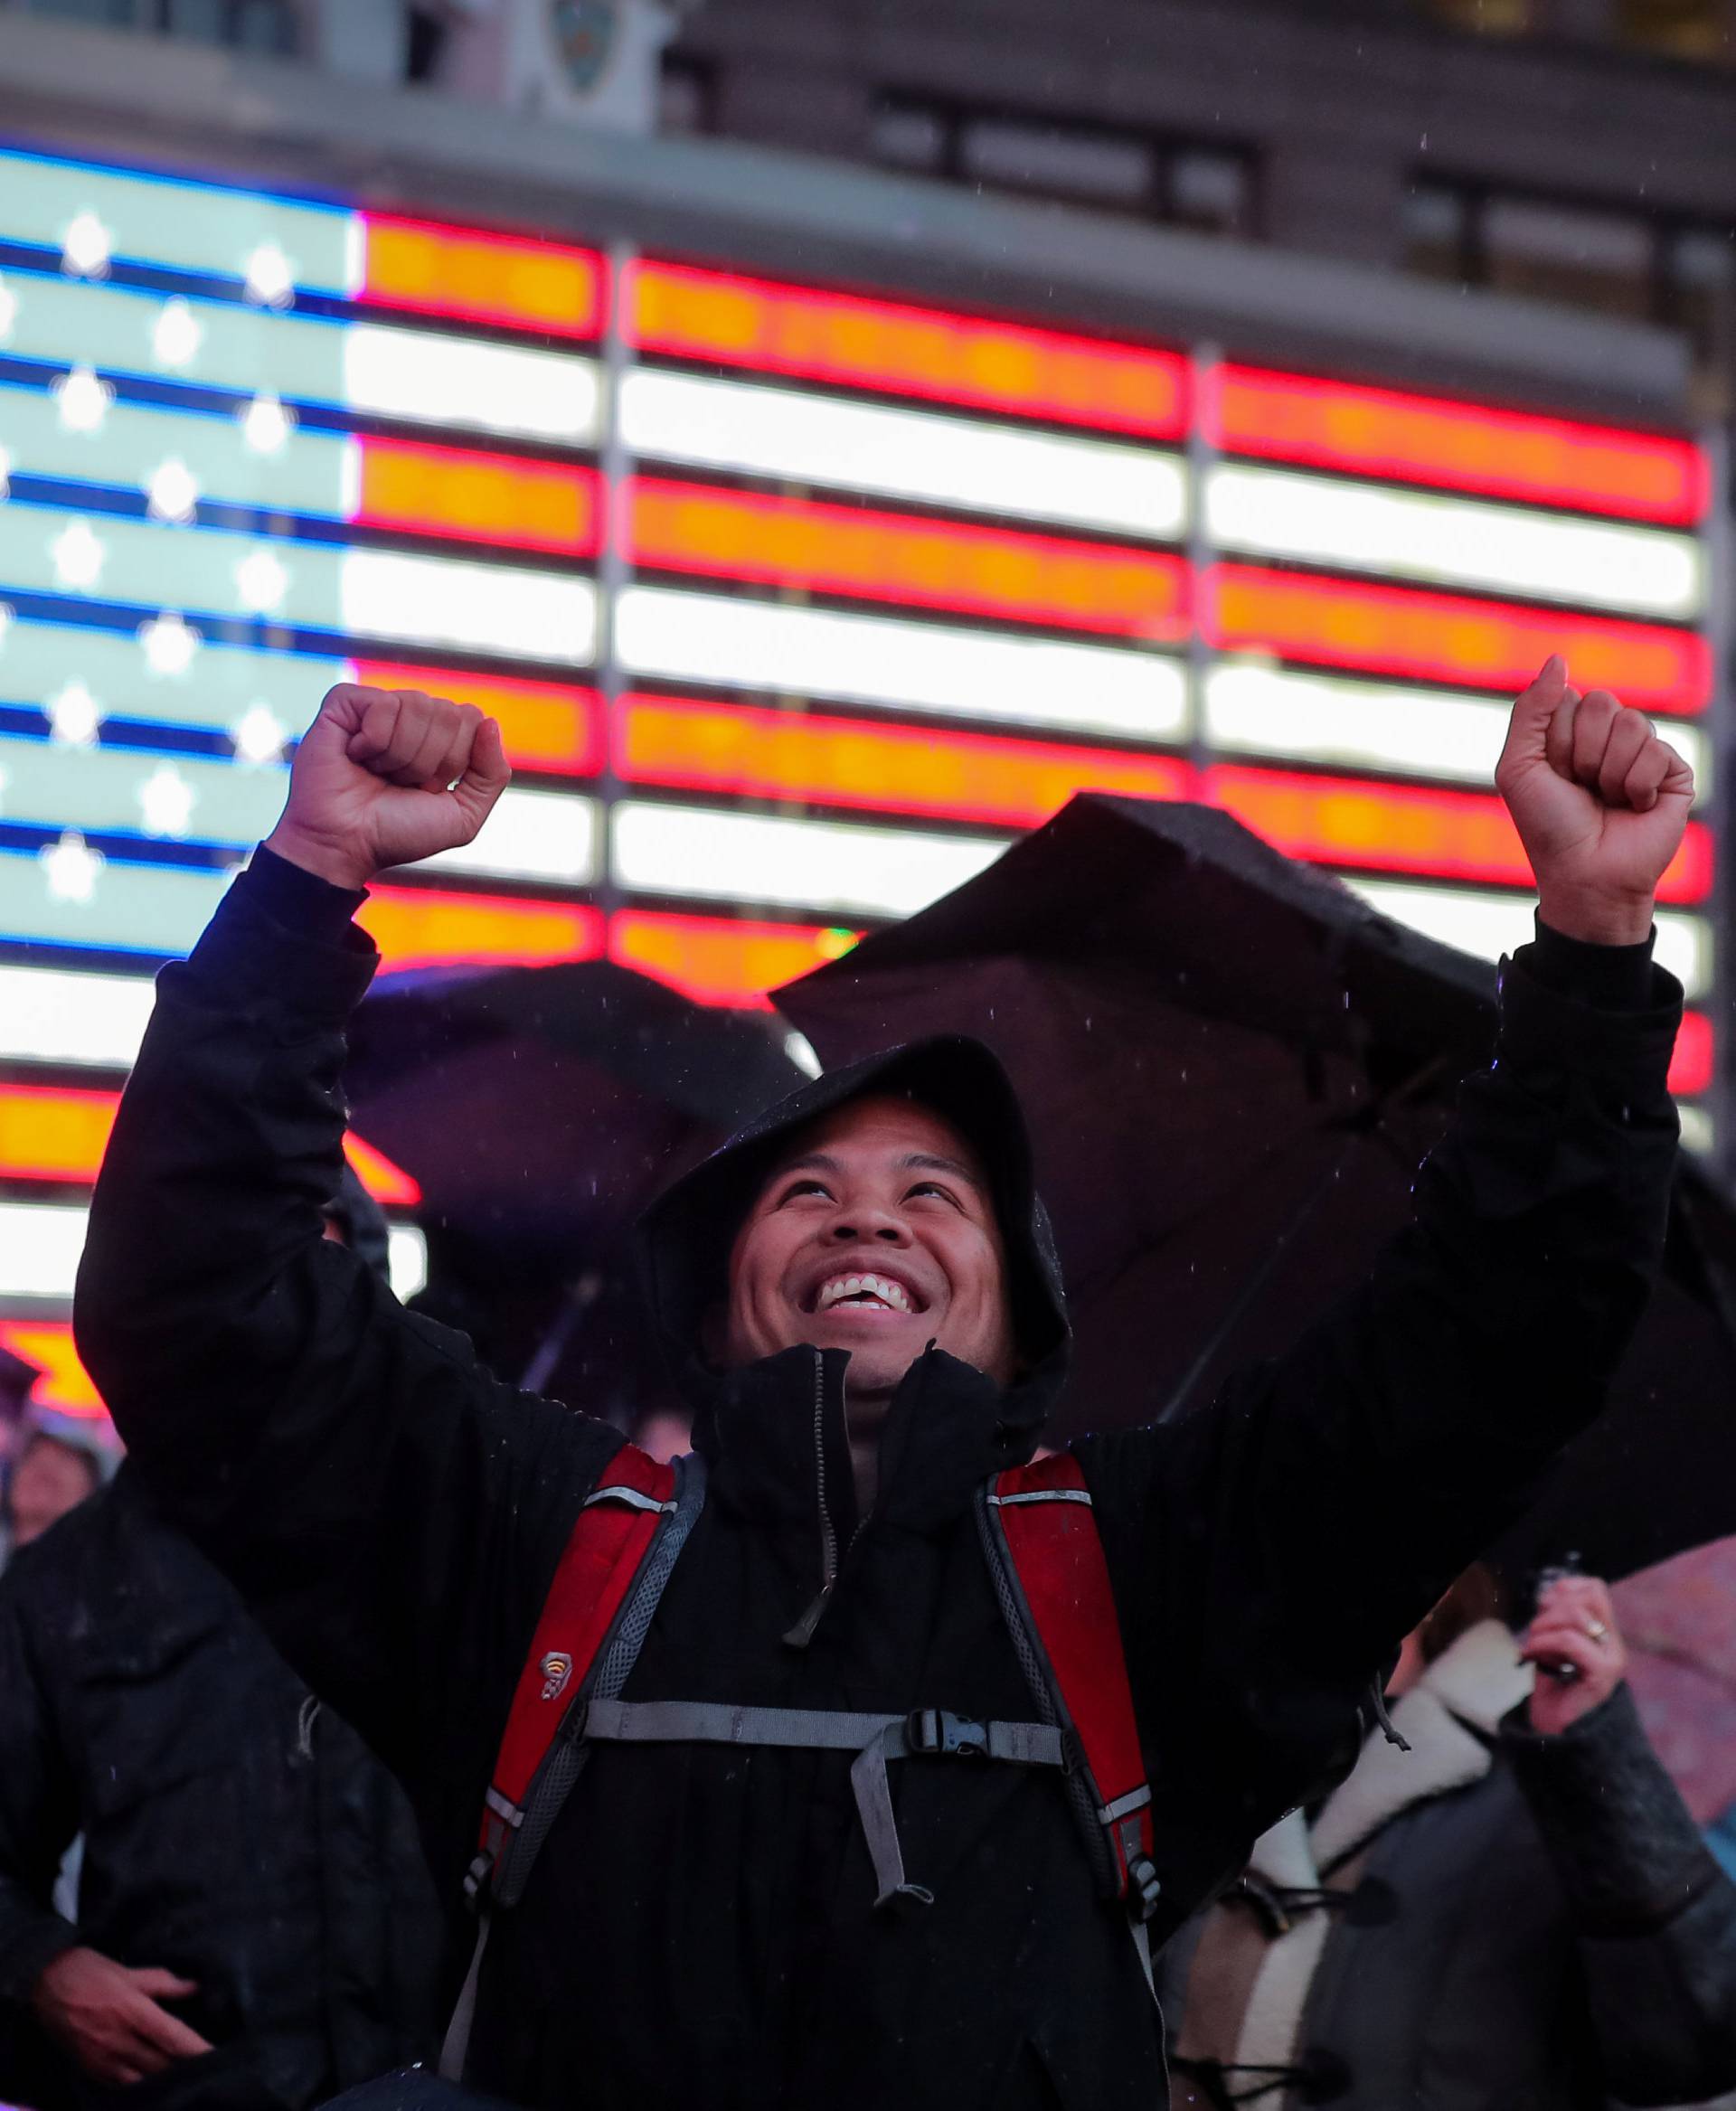 People react as they watch on a video screen as the spaceship InSight lands on Mars surface after a six-month journey, in Times Square in New York